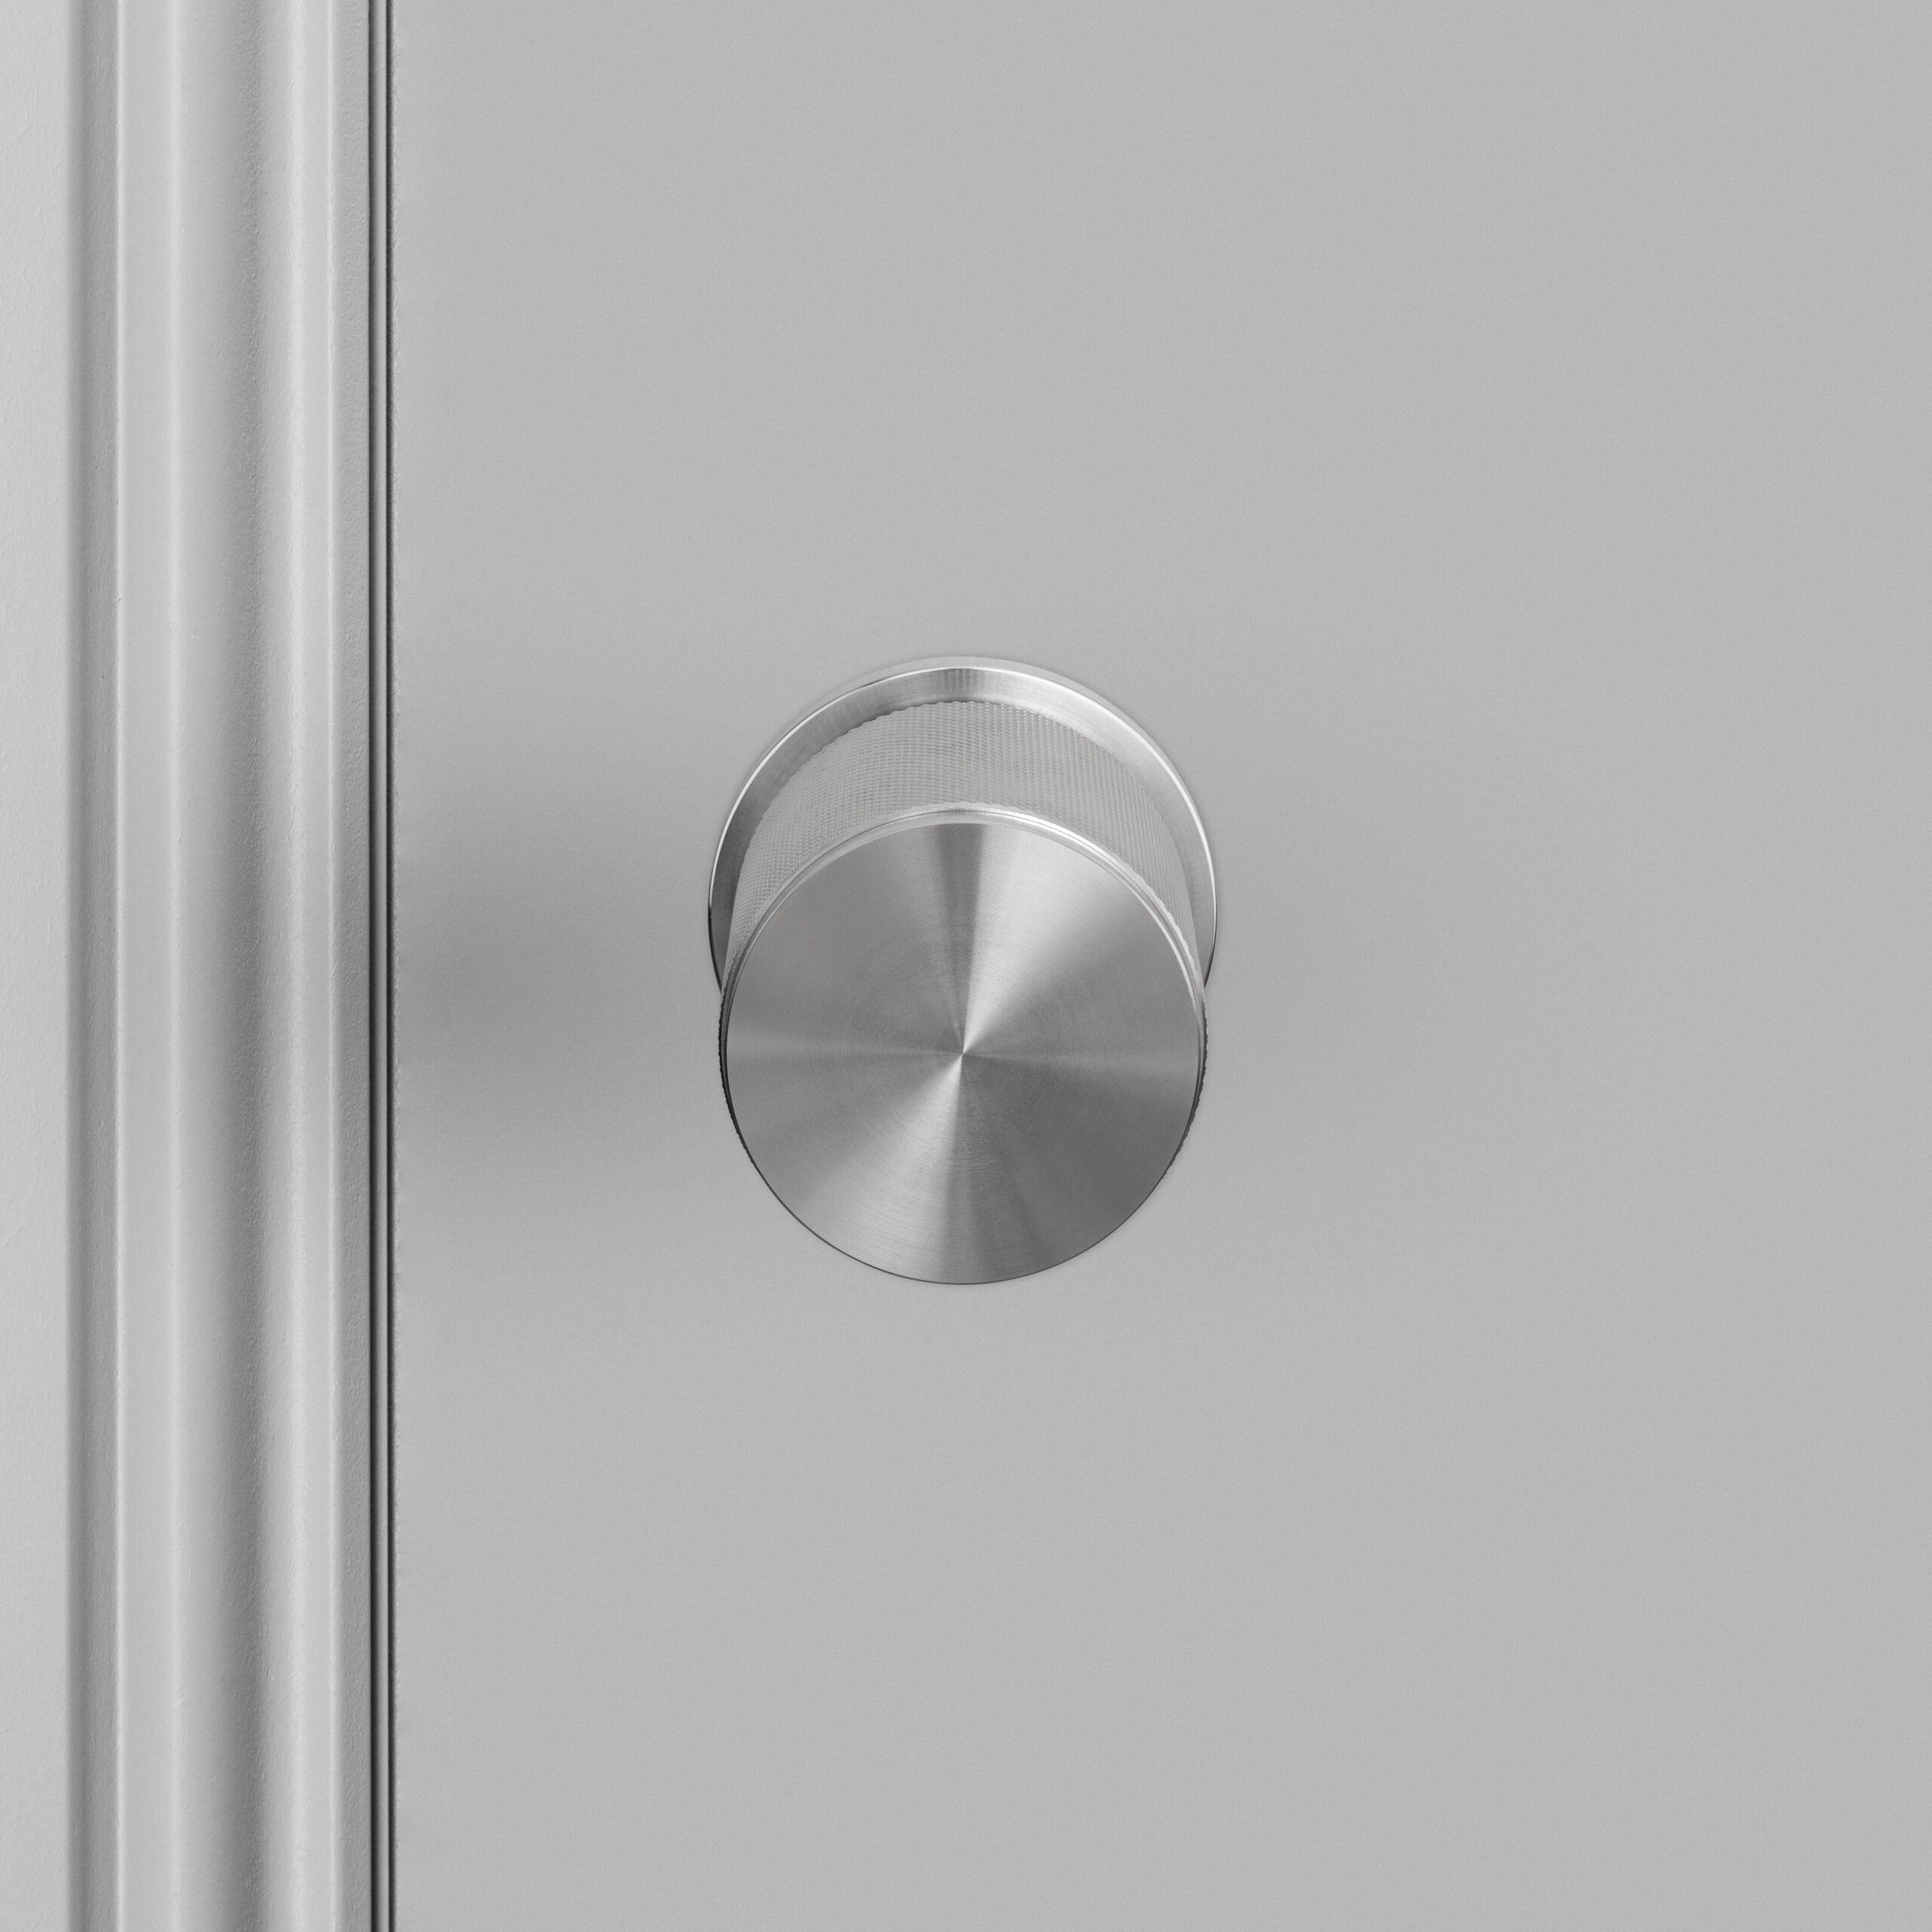 Buster + Punch Door Knob Single Sided, Cross Design, FIXED TYPE Hardware Buster + Punch Steel  